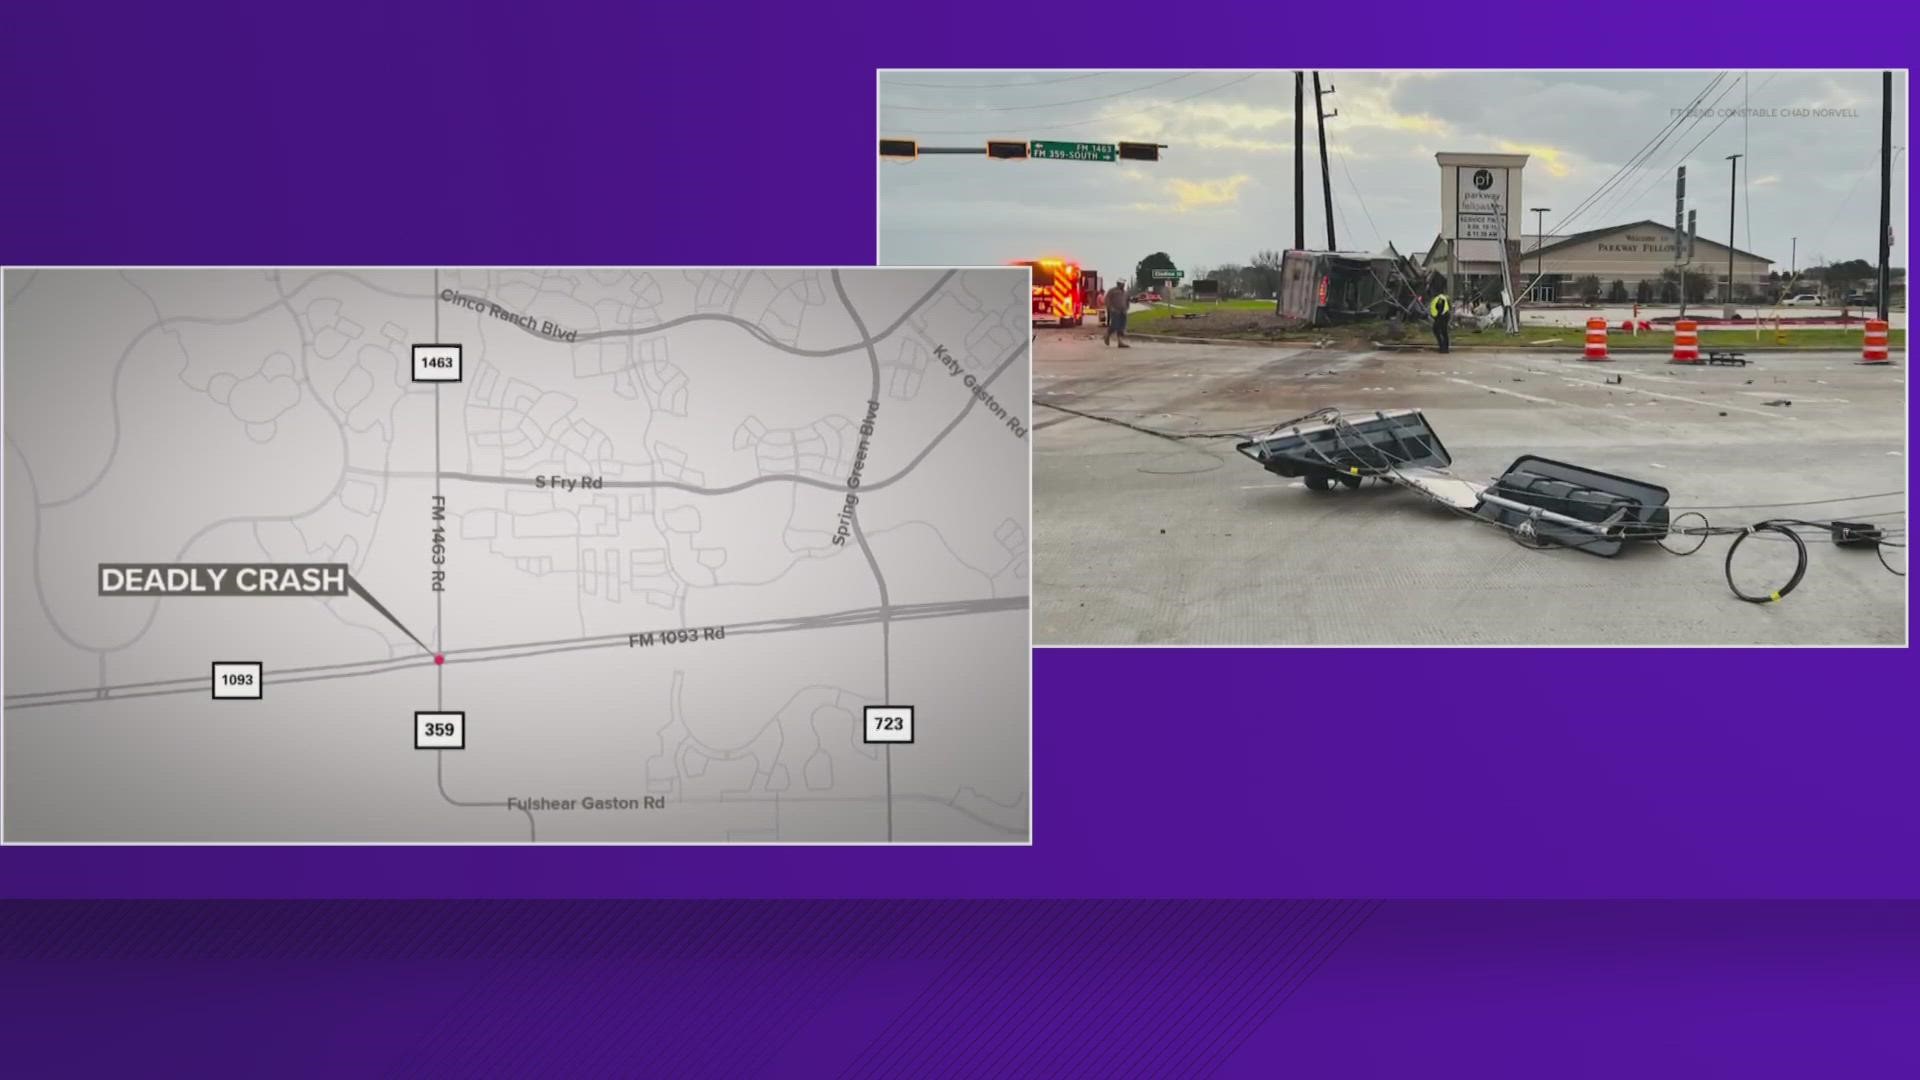 Deputies are currently investigating a fatal crash involving an 18-wheeler and a pickup truck on FM 1093 in Fulshear.